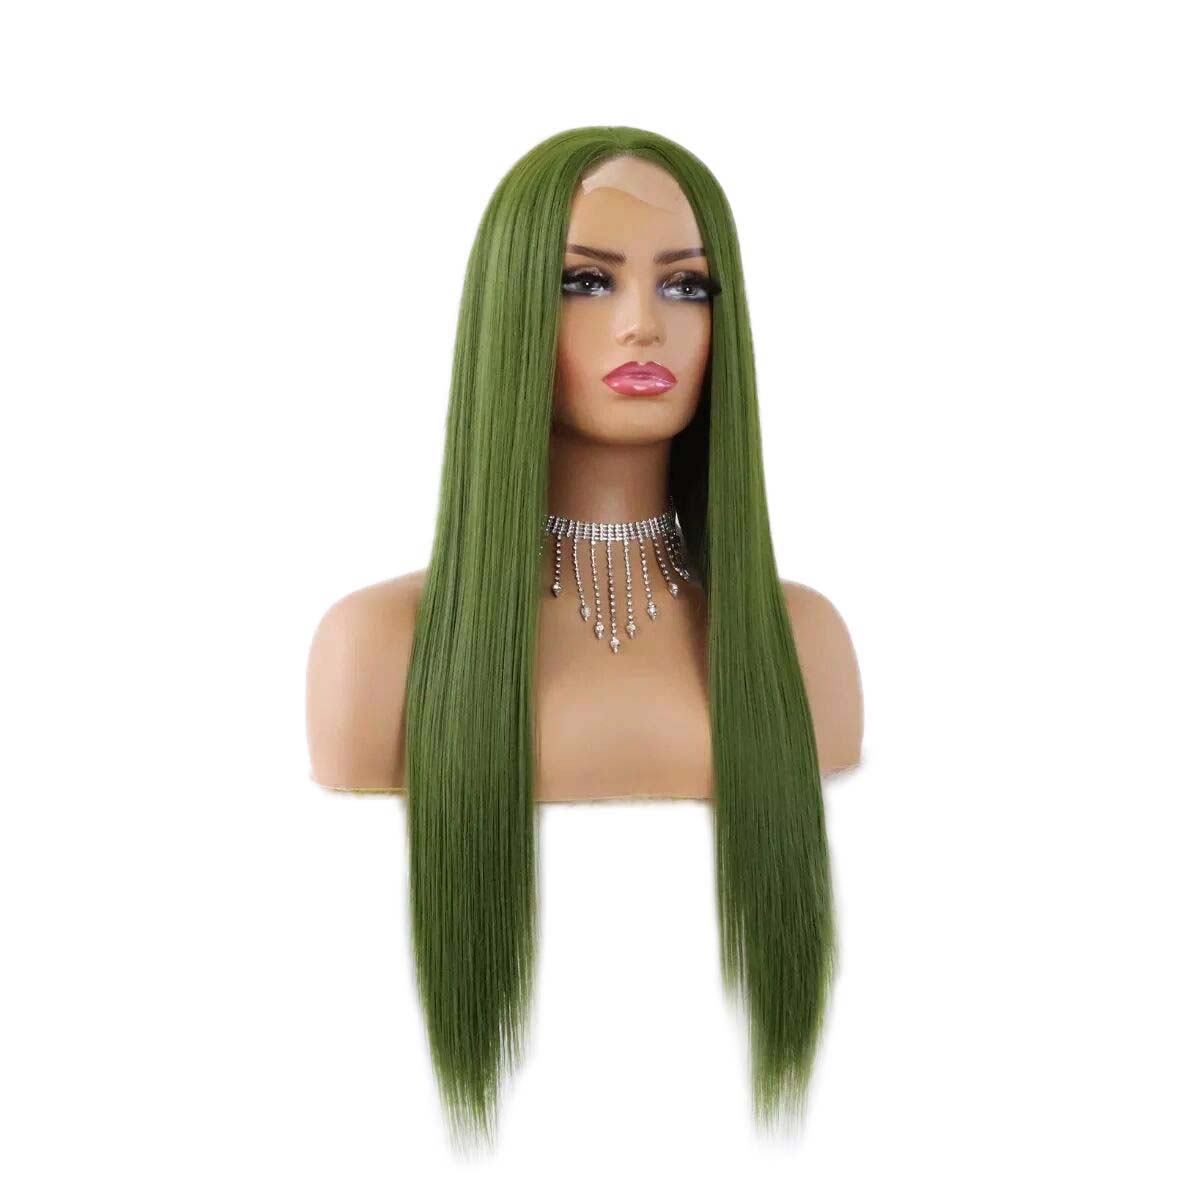 Lace Front Synthetic Wig Green Long Heat Resistant Fiber Hair for Women Half Hand Tied Wig Cosplay Daily Use Hair 26 Inch